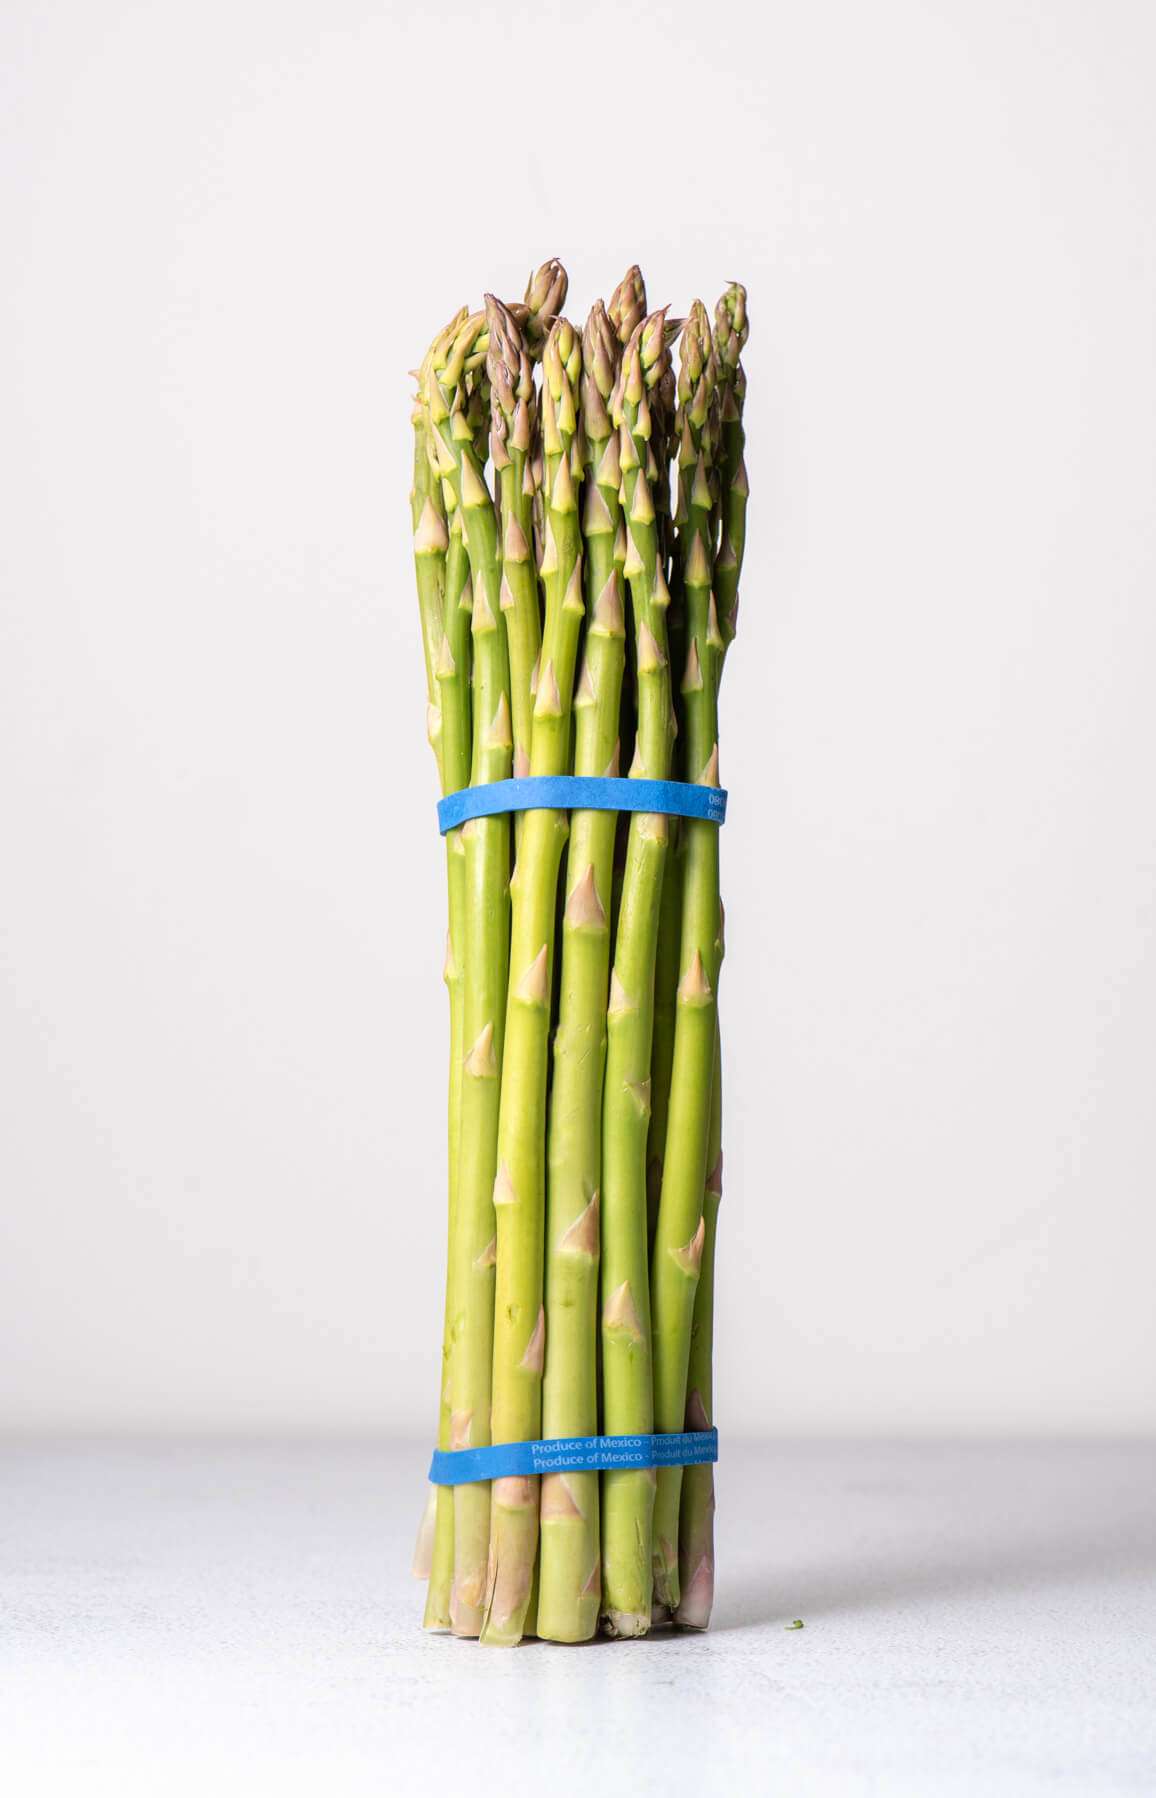 asparagus buch on a white background